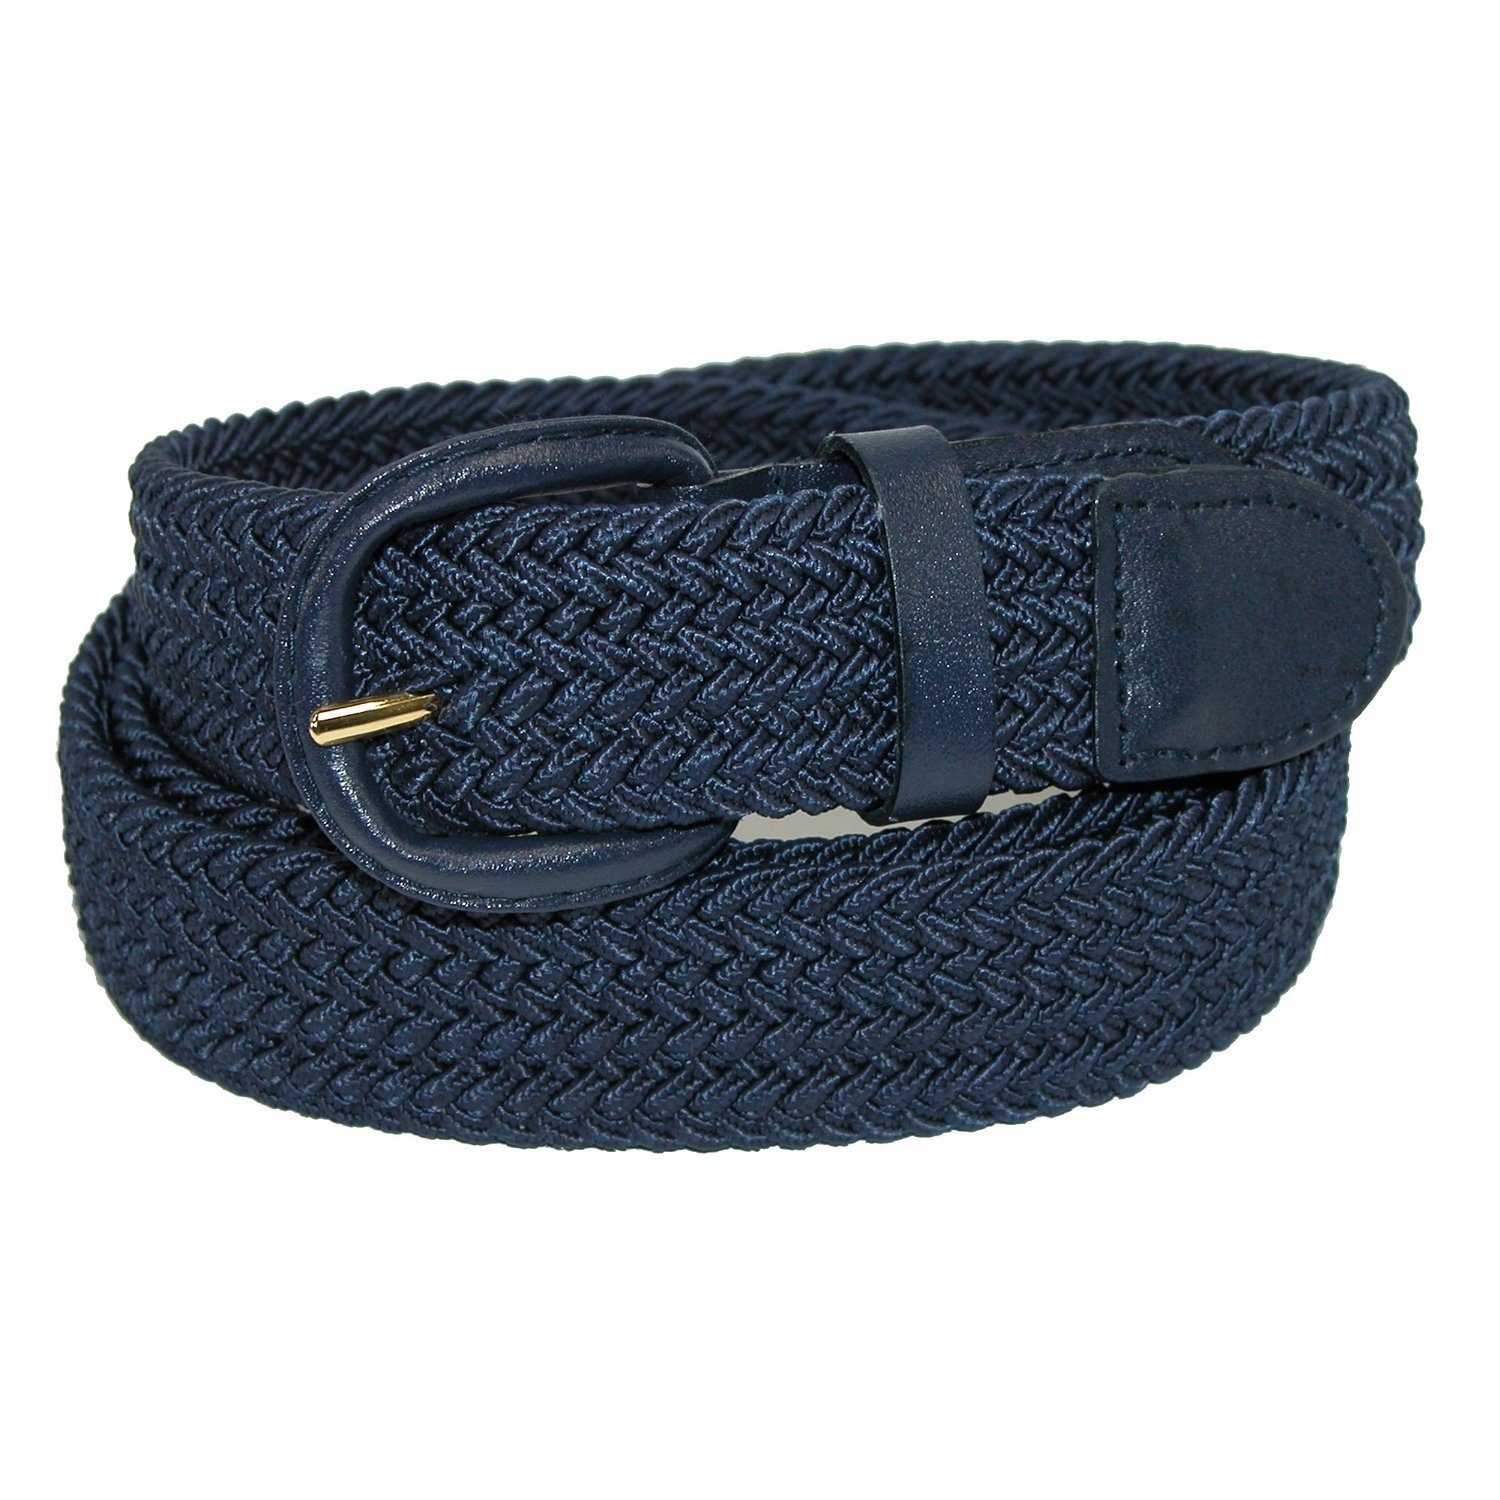 Unisex Braided Elastic Woven Stretch Belt with Genuine Leather Buckle